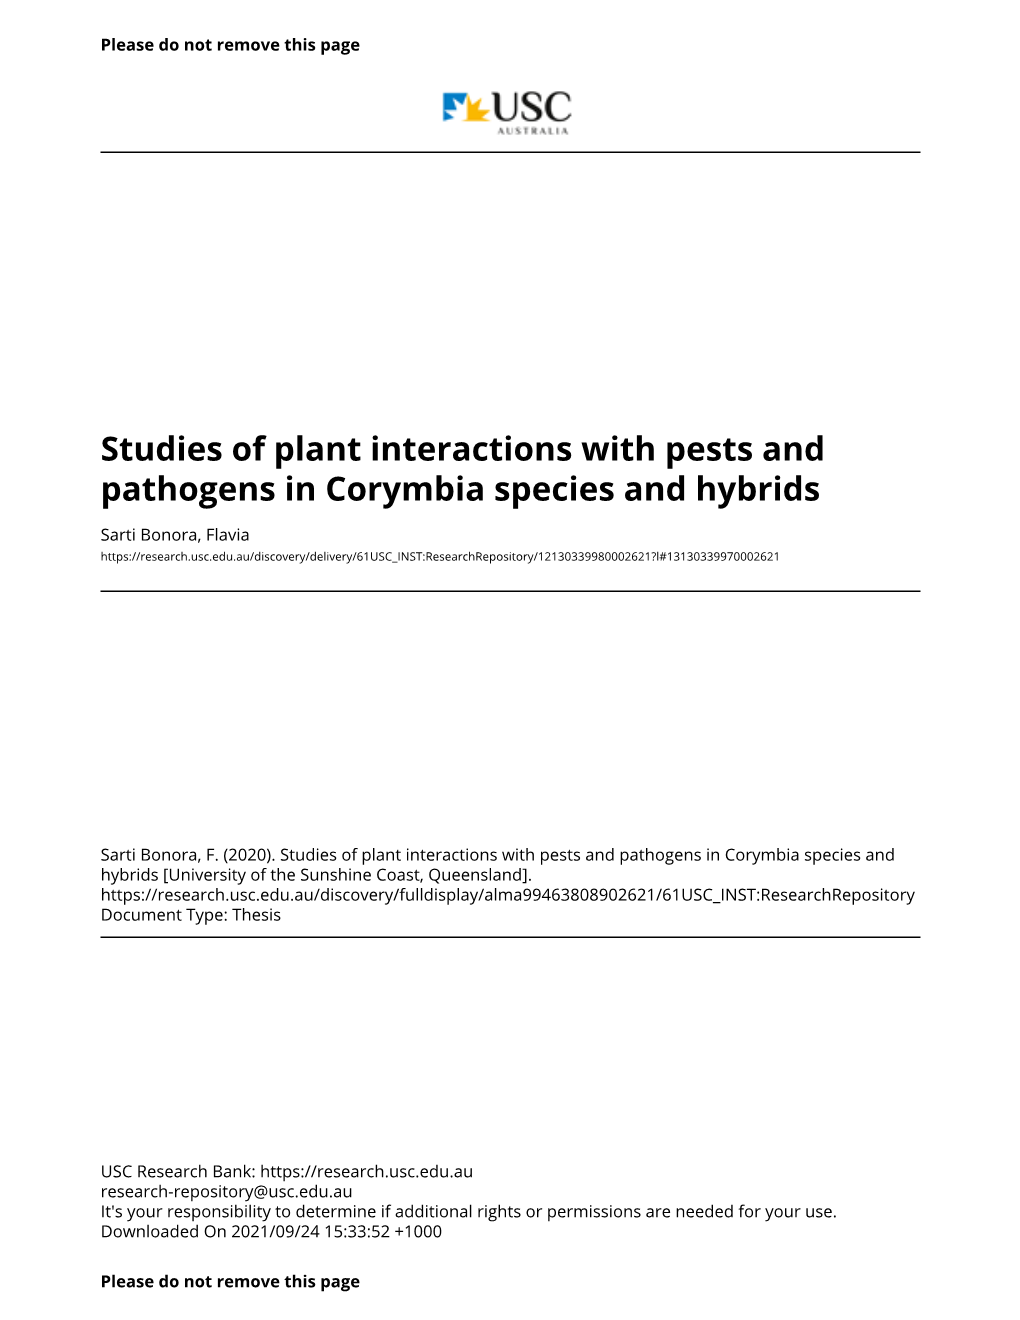 Spotted Gums and Hybrids: Impact of Pests and Diseases, Ontogeny and Climate on Tree Performance